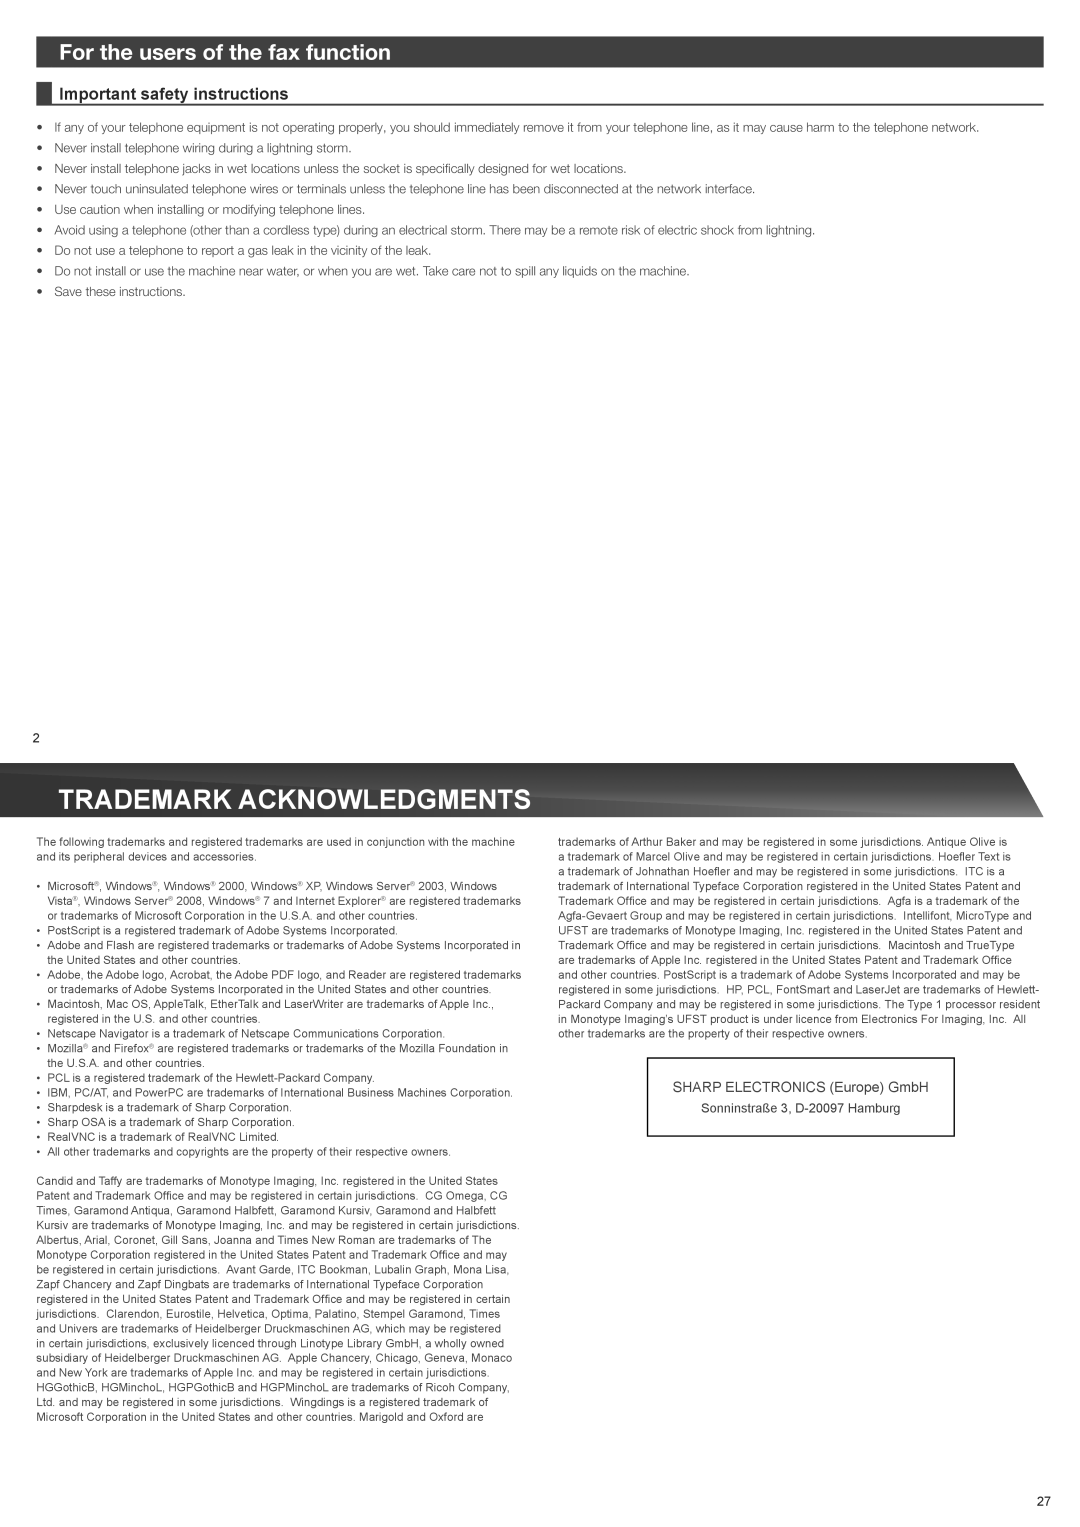 Sharp MX-3110N titleTrademark1 L acknowledgments, For the users of the fax function, Important safety instructions 